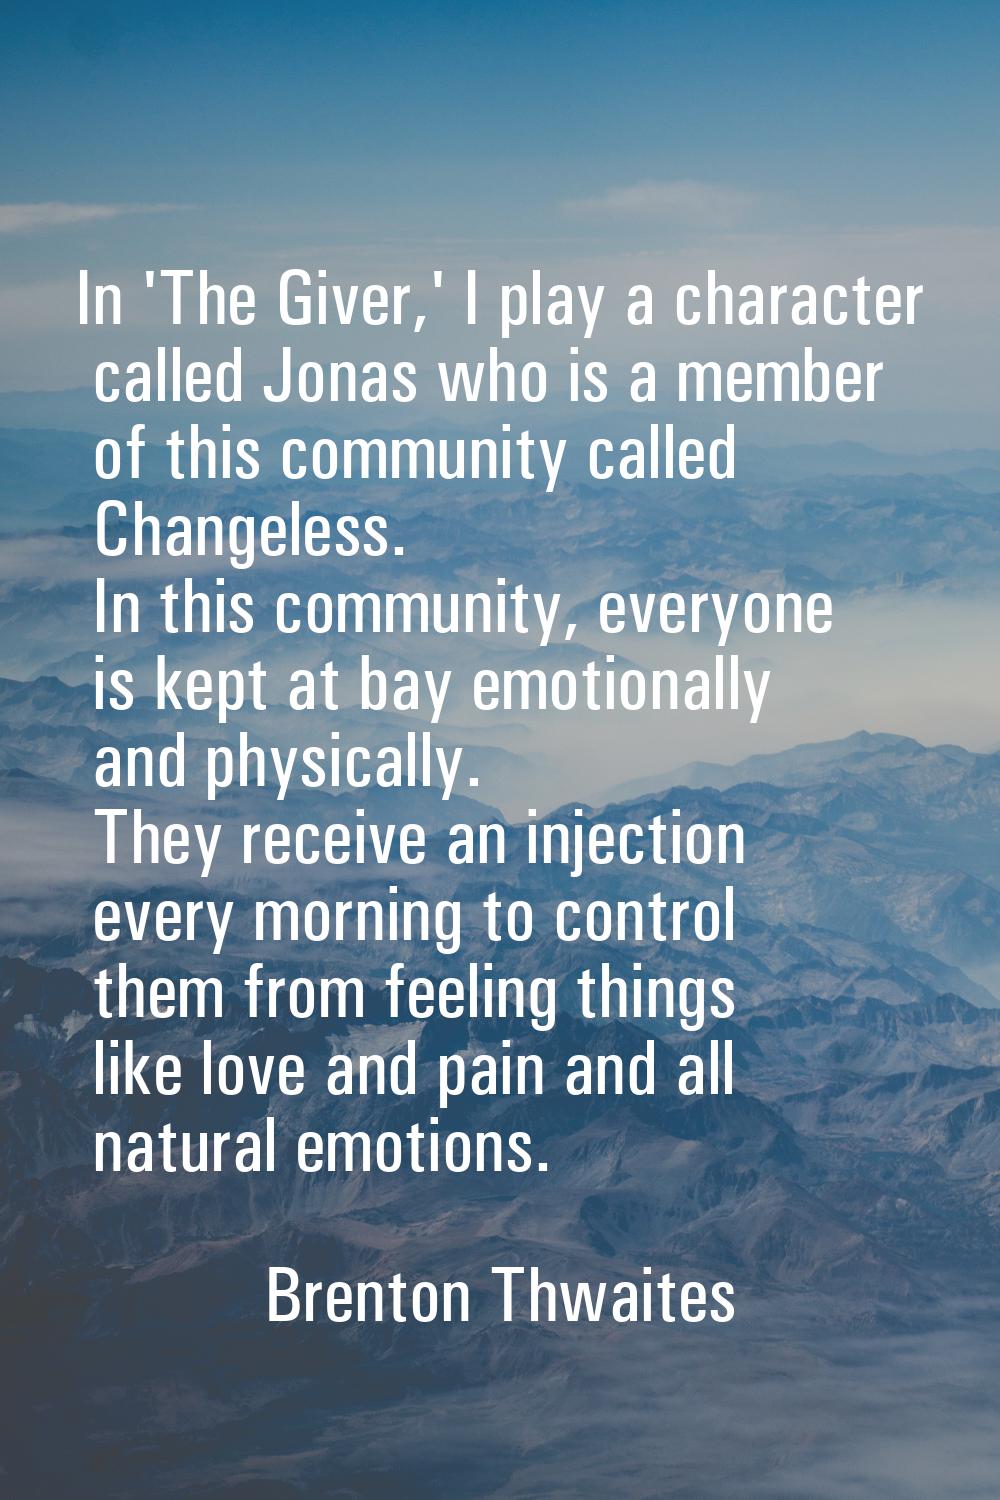 In 'The Giver,' I play a character called Jonas who is a member of this community called Changeless